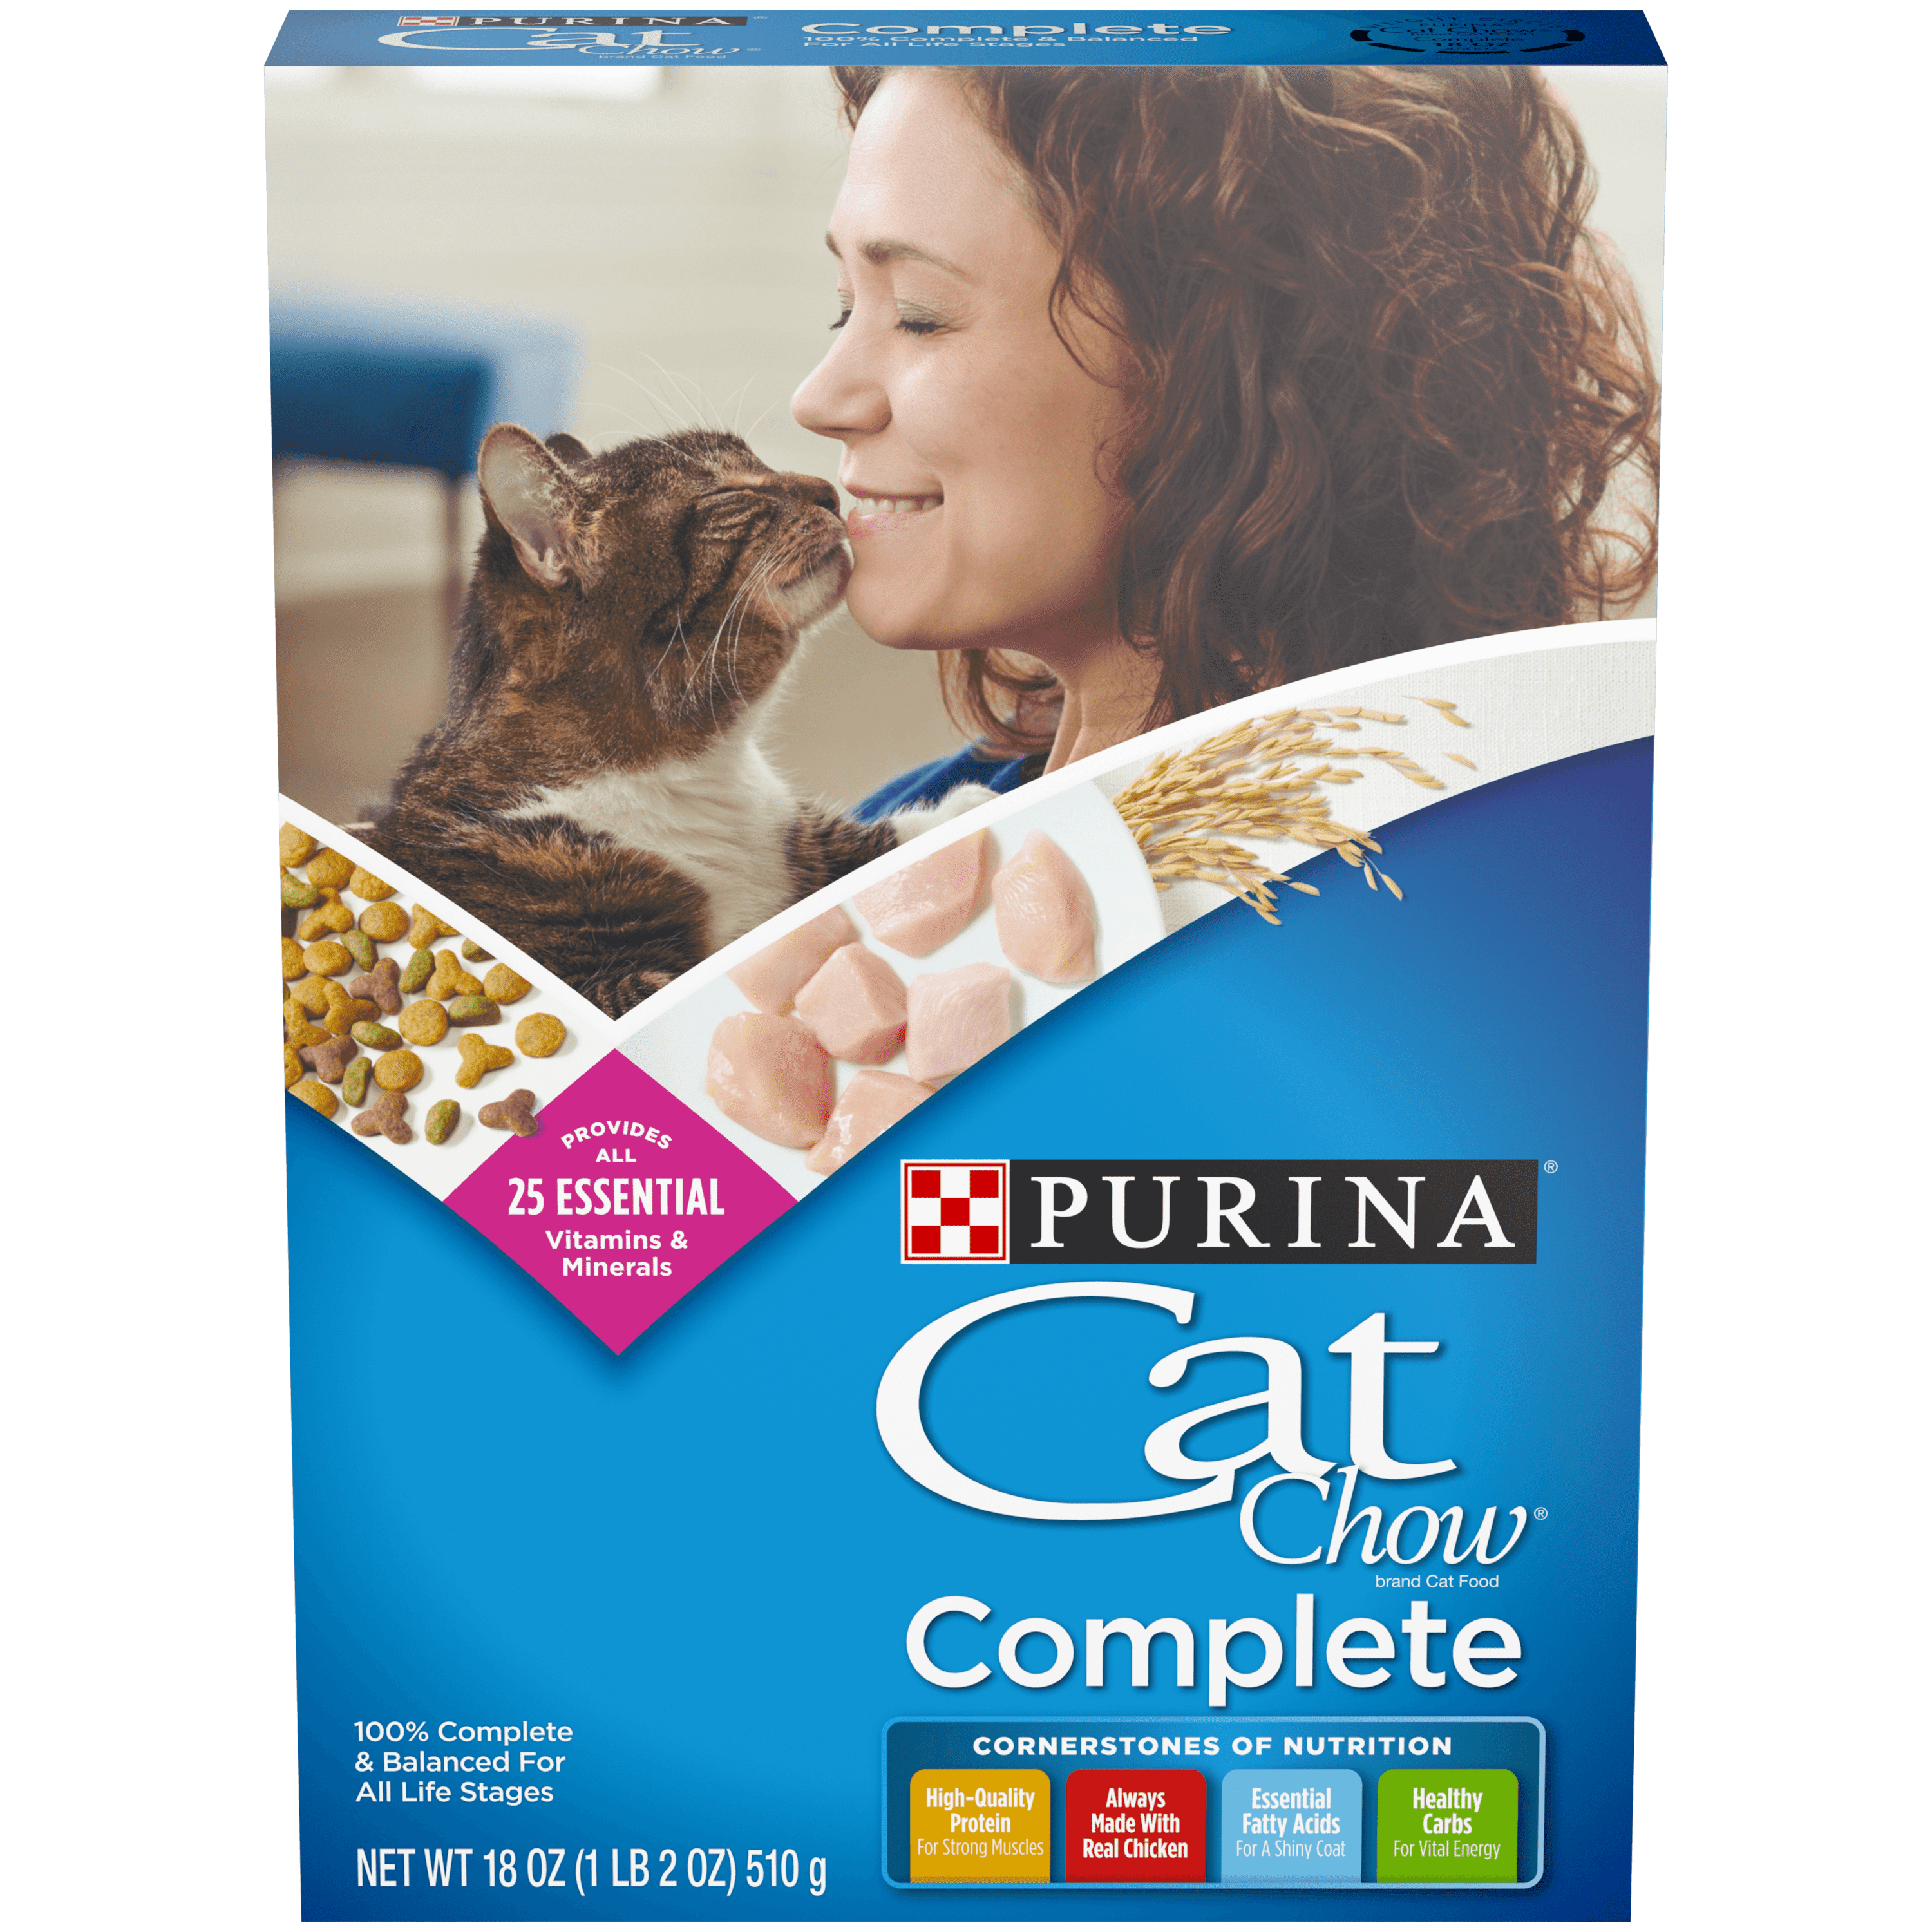 Purina Cat Chow Dry Cat Food, Complete 18 oz. Box